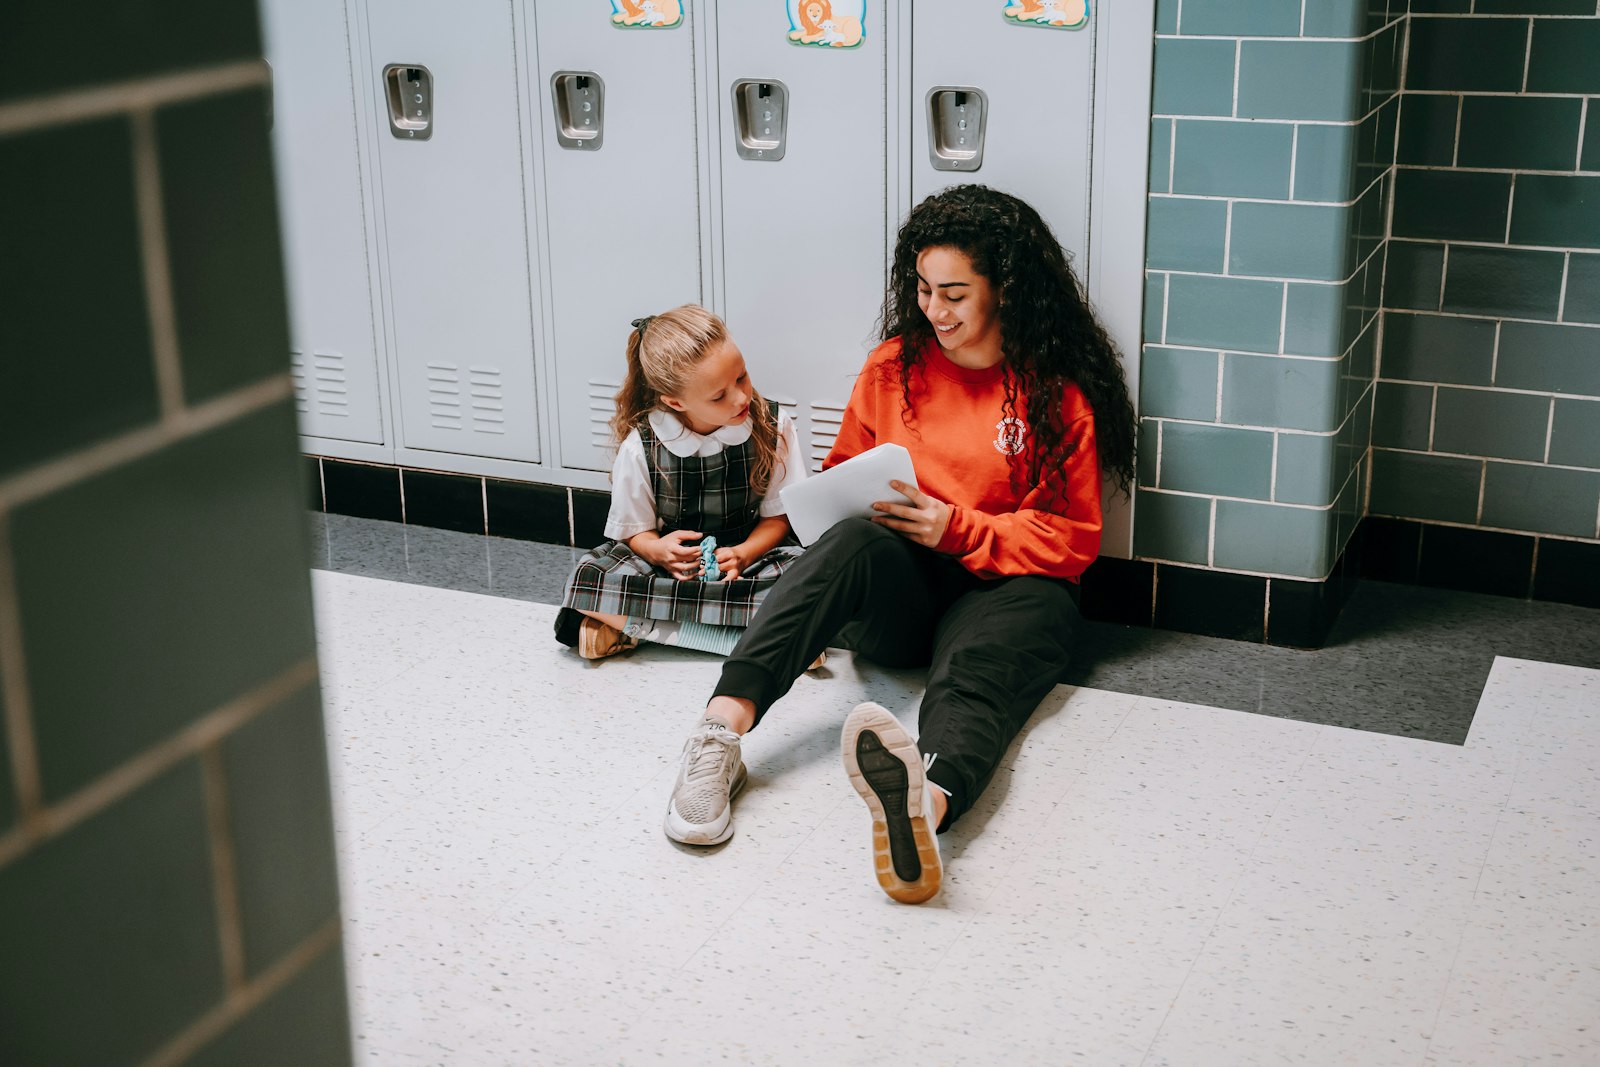 A high school student from Divine Child High School in Dearborn reads to a younger student during a cross-class activity.